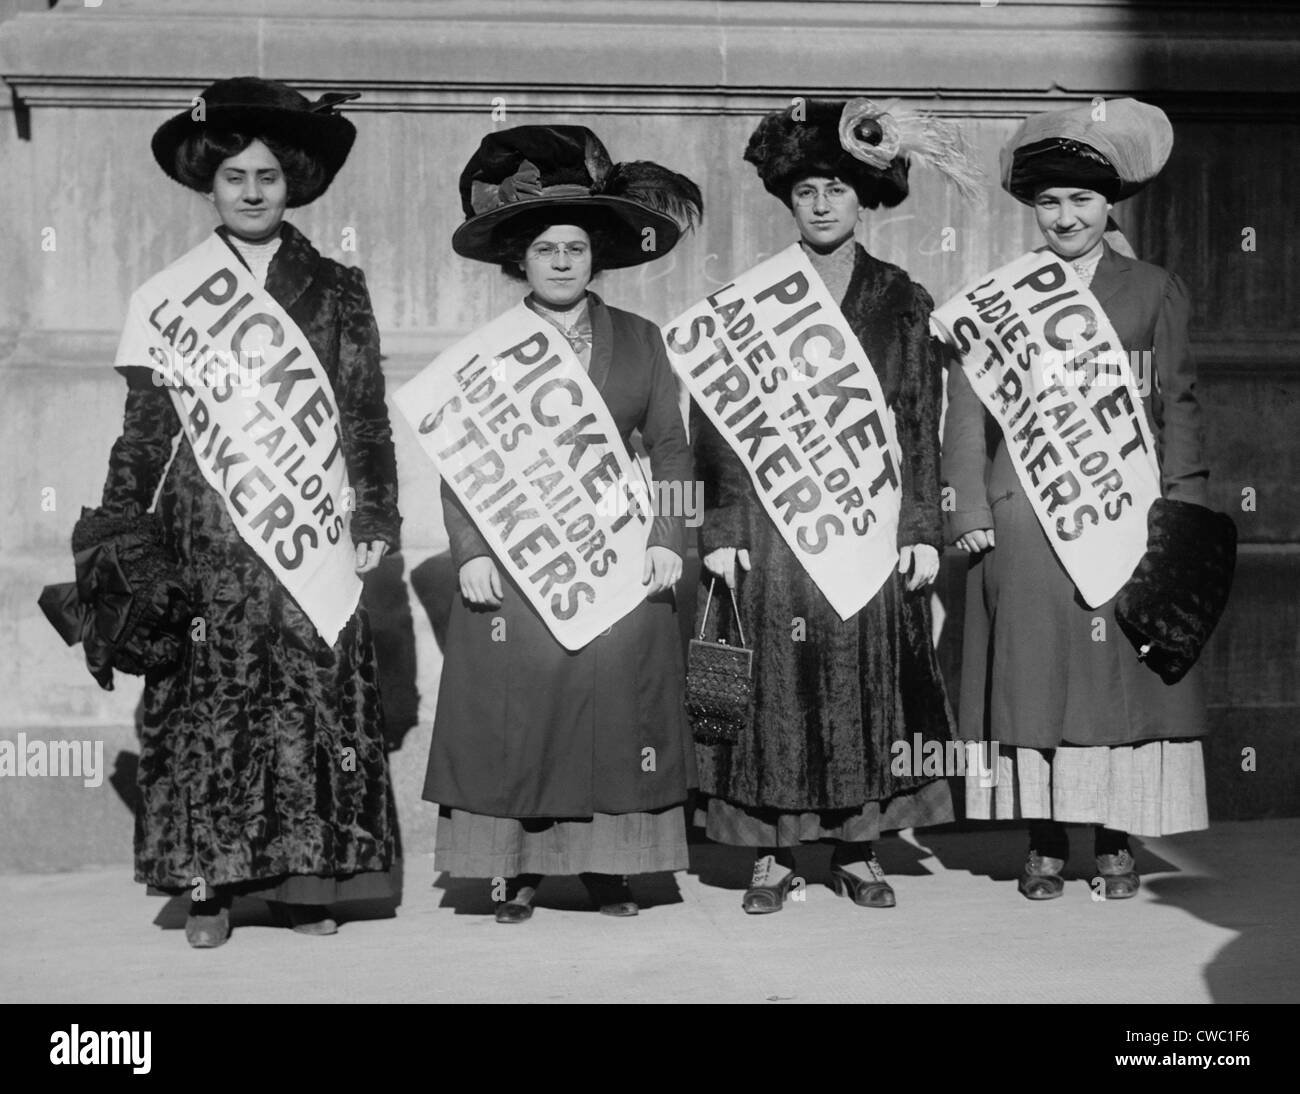 Strike pickets from Ladies Tailors, during the New York shirtwaist strike of 1909 which began after a labor dispute at the Stock Photo